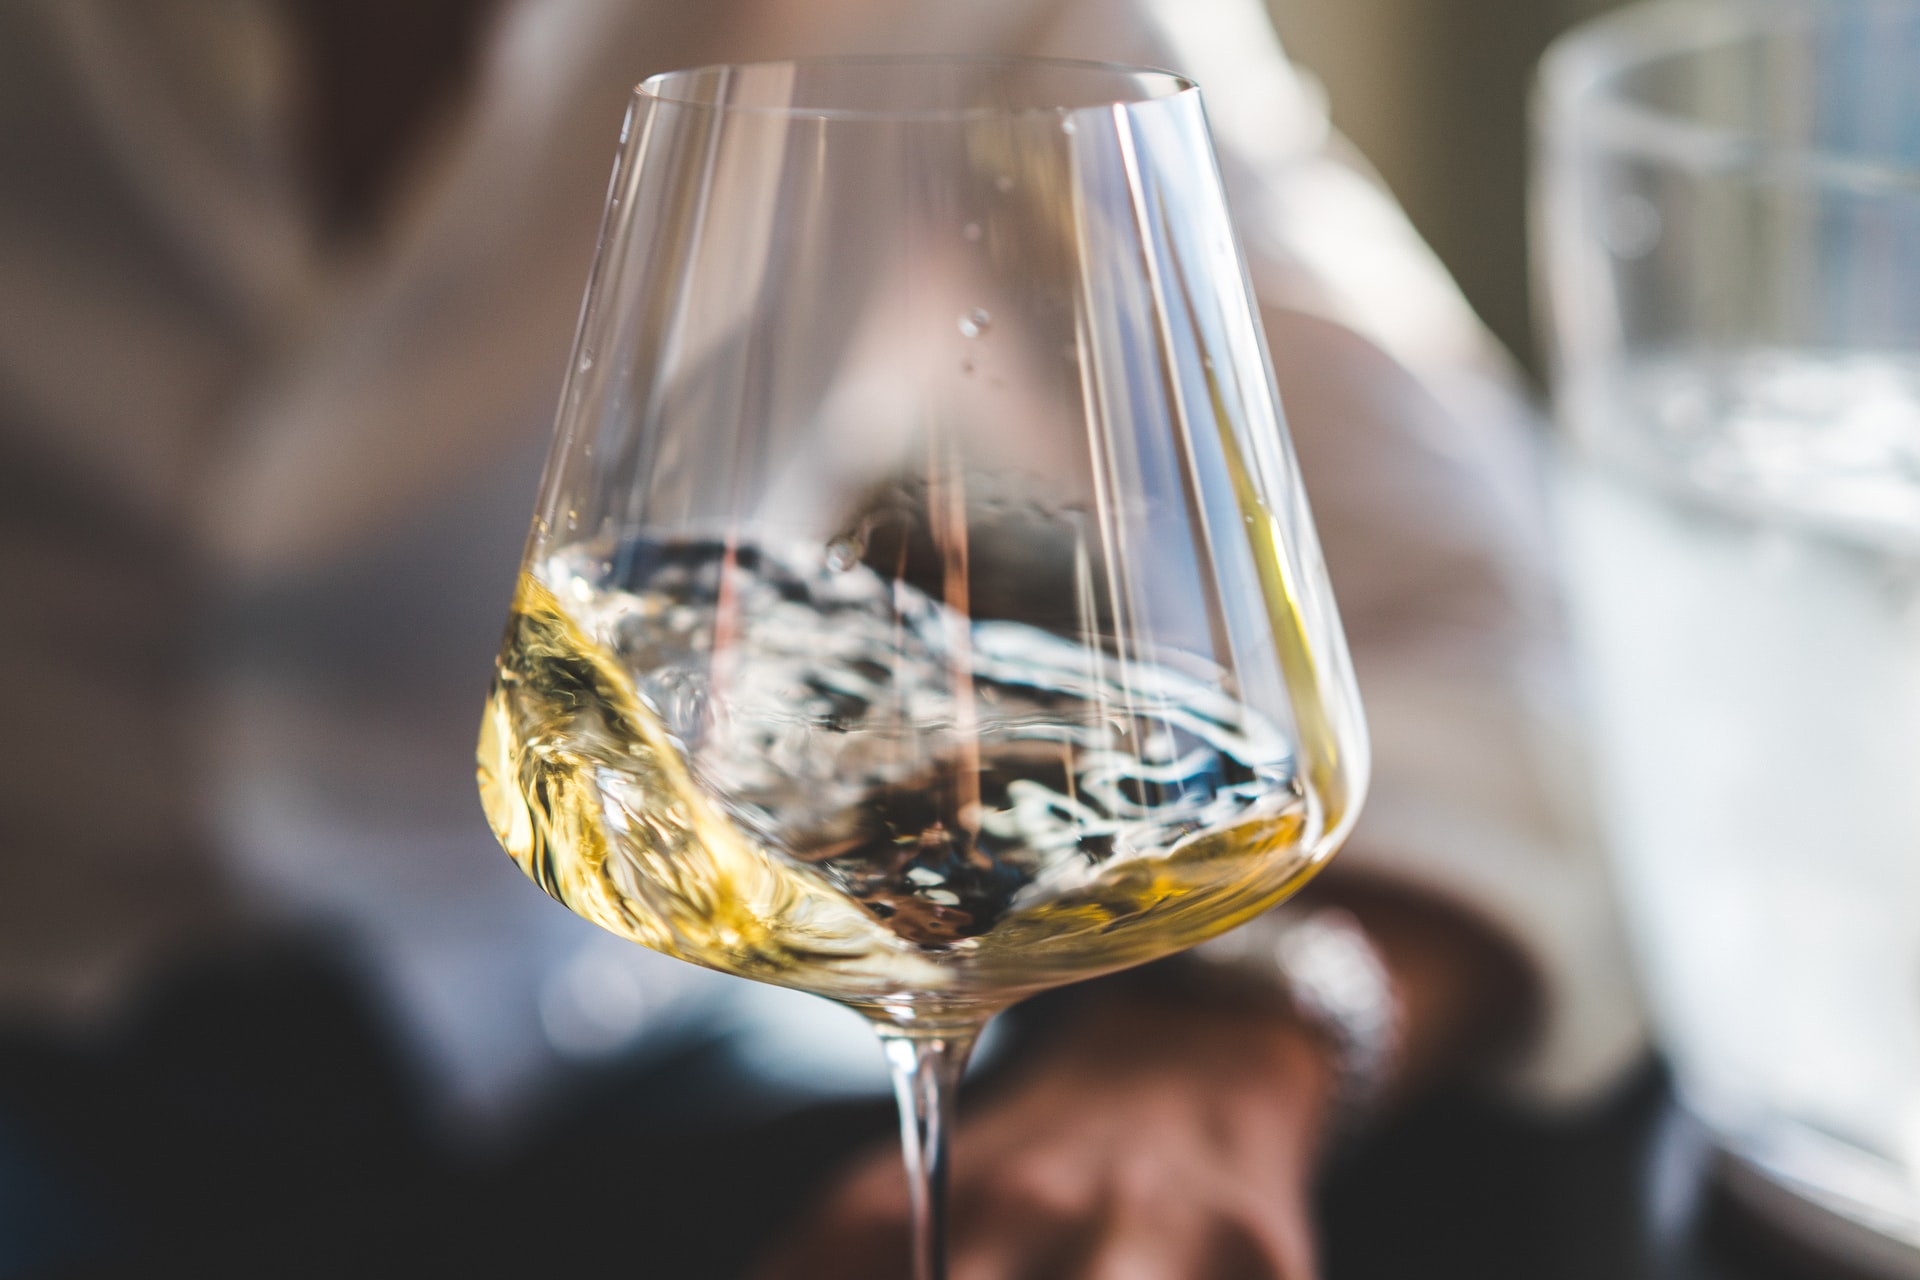 blind wine tasting ideas and themes to host your own event